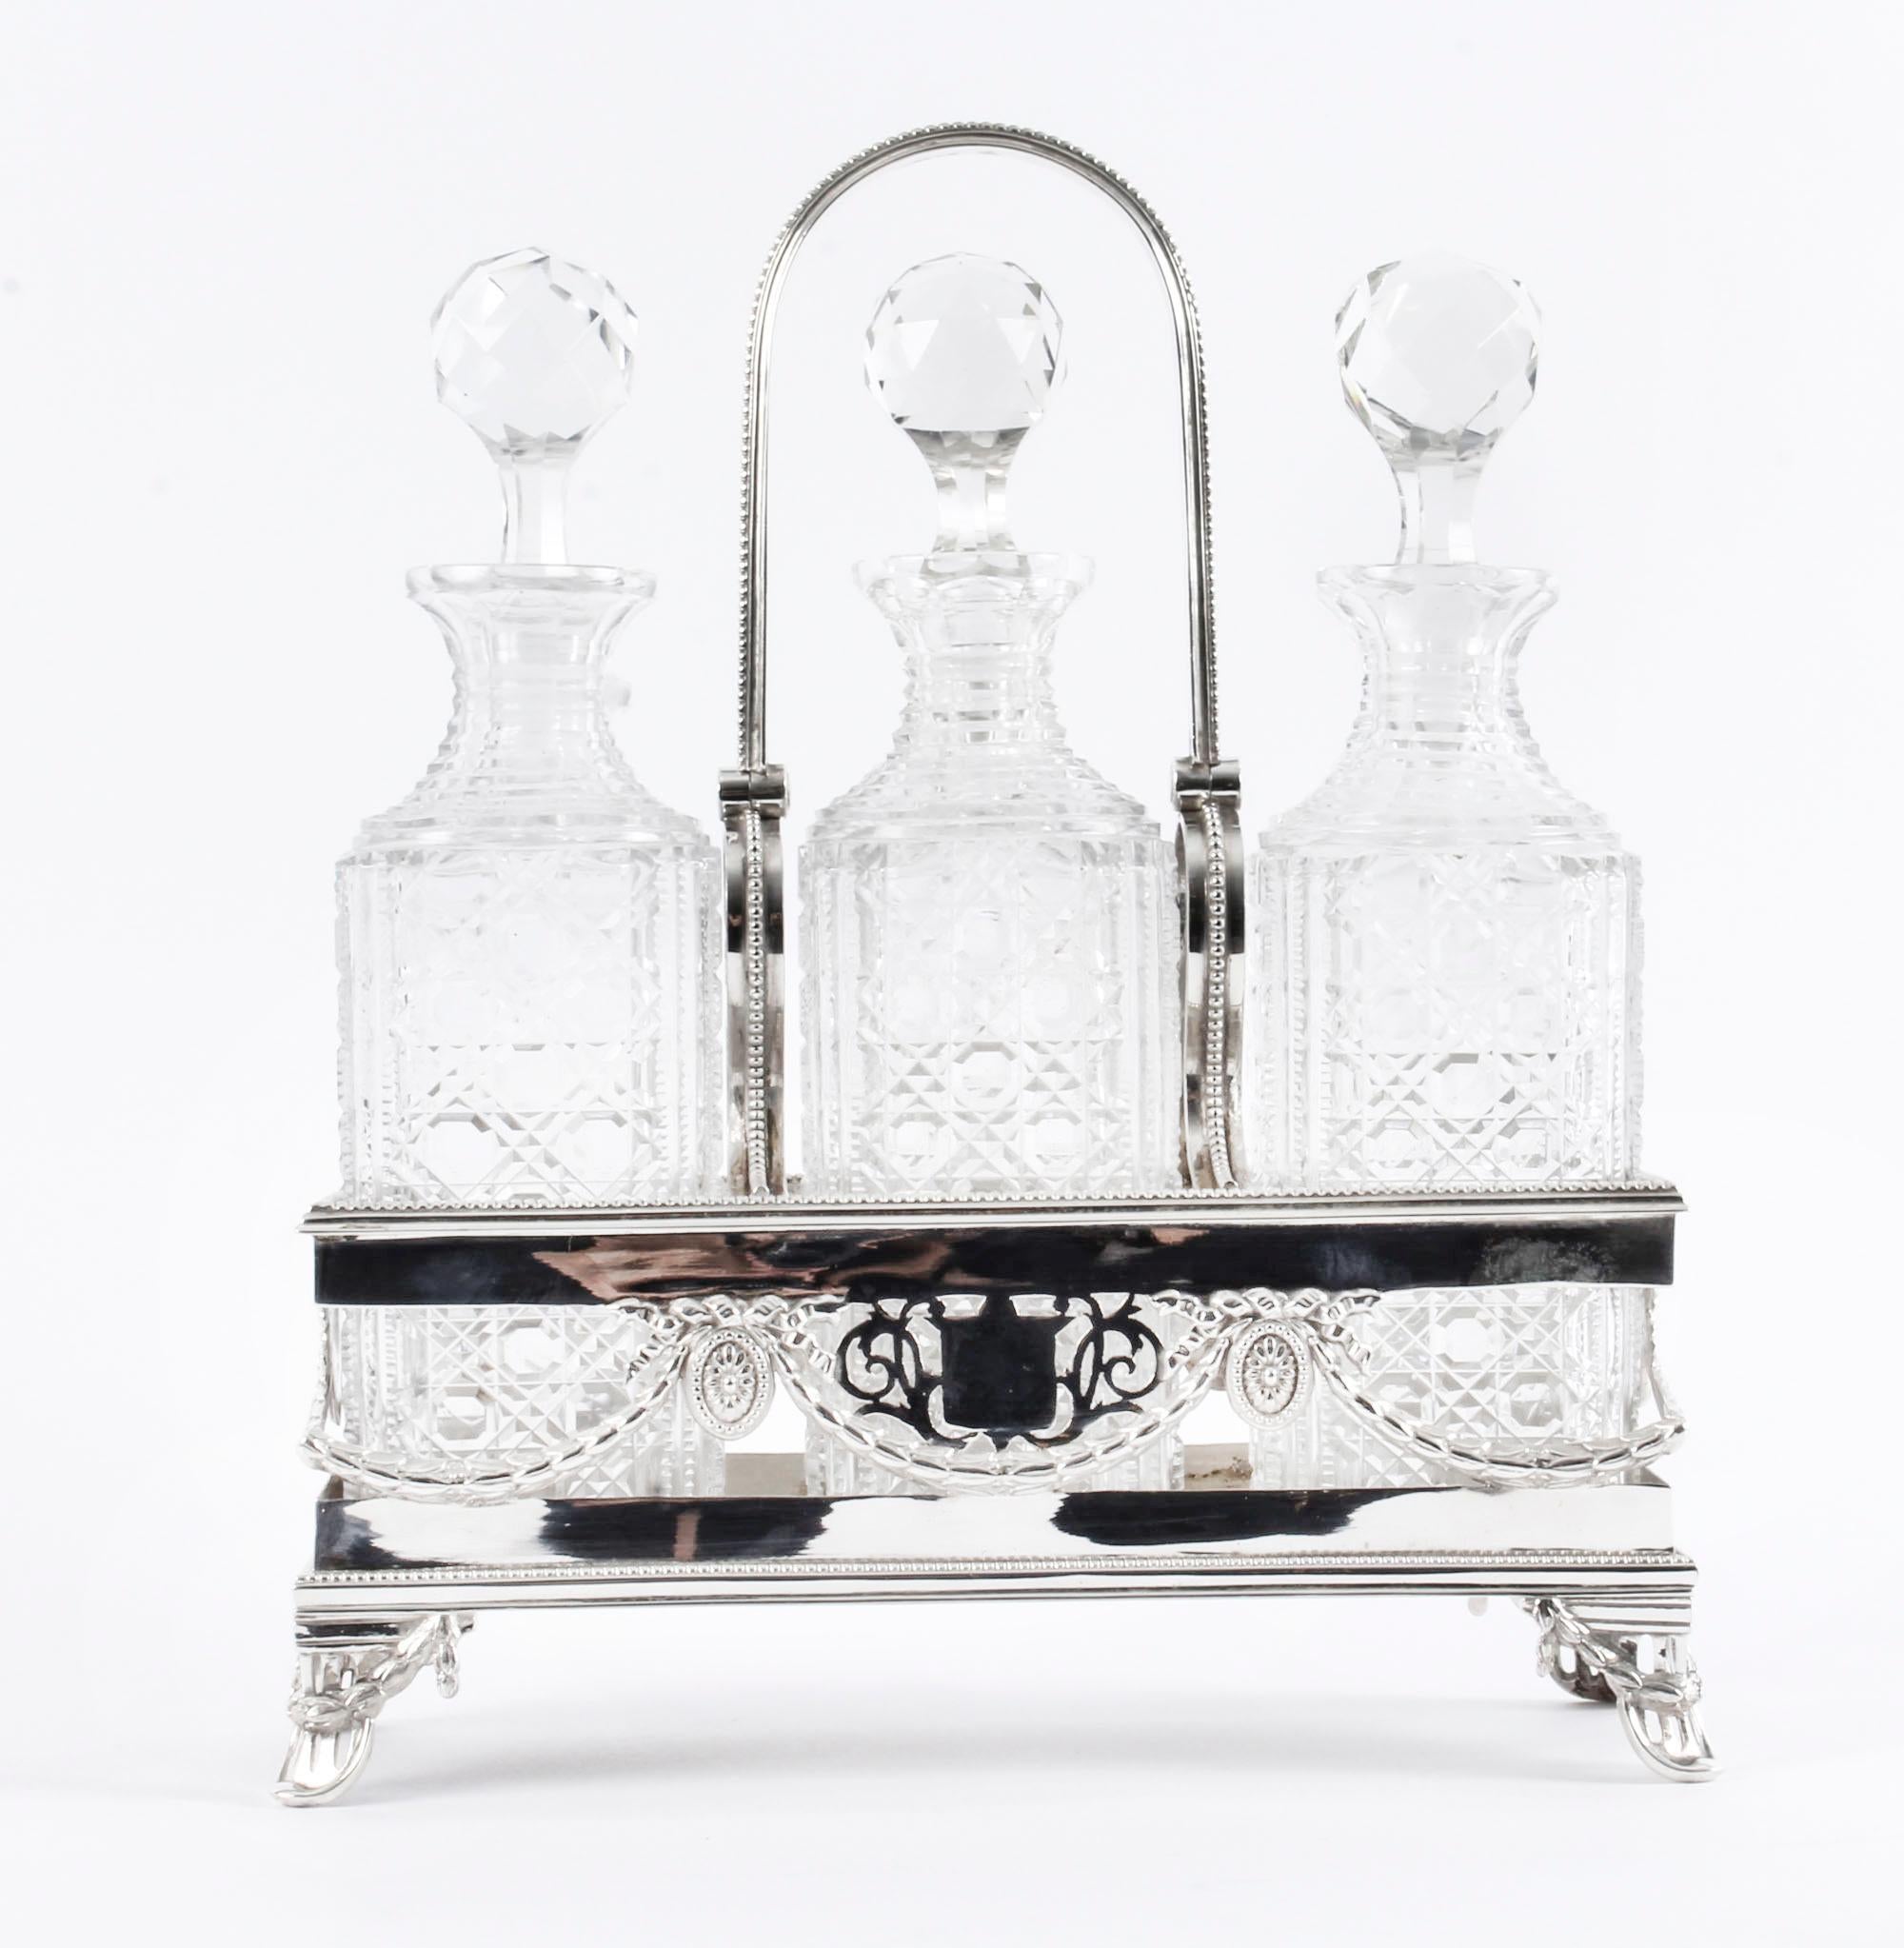 This is a truly resplendent antique Victorian silver-plated three crystal cut bottle tantalus set, circa 1880 in date. 

This magnificent tantalus set is by the renowned silversmiths Martin, Hall & Co of Sheffield, and retailed by the